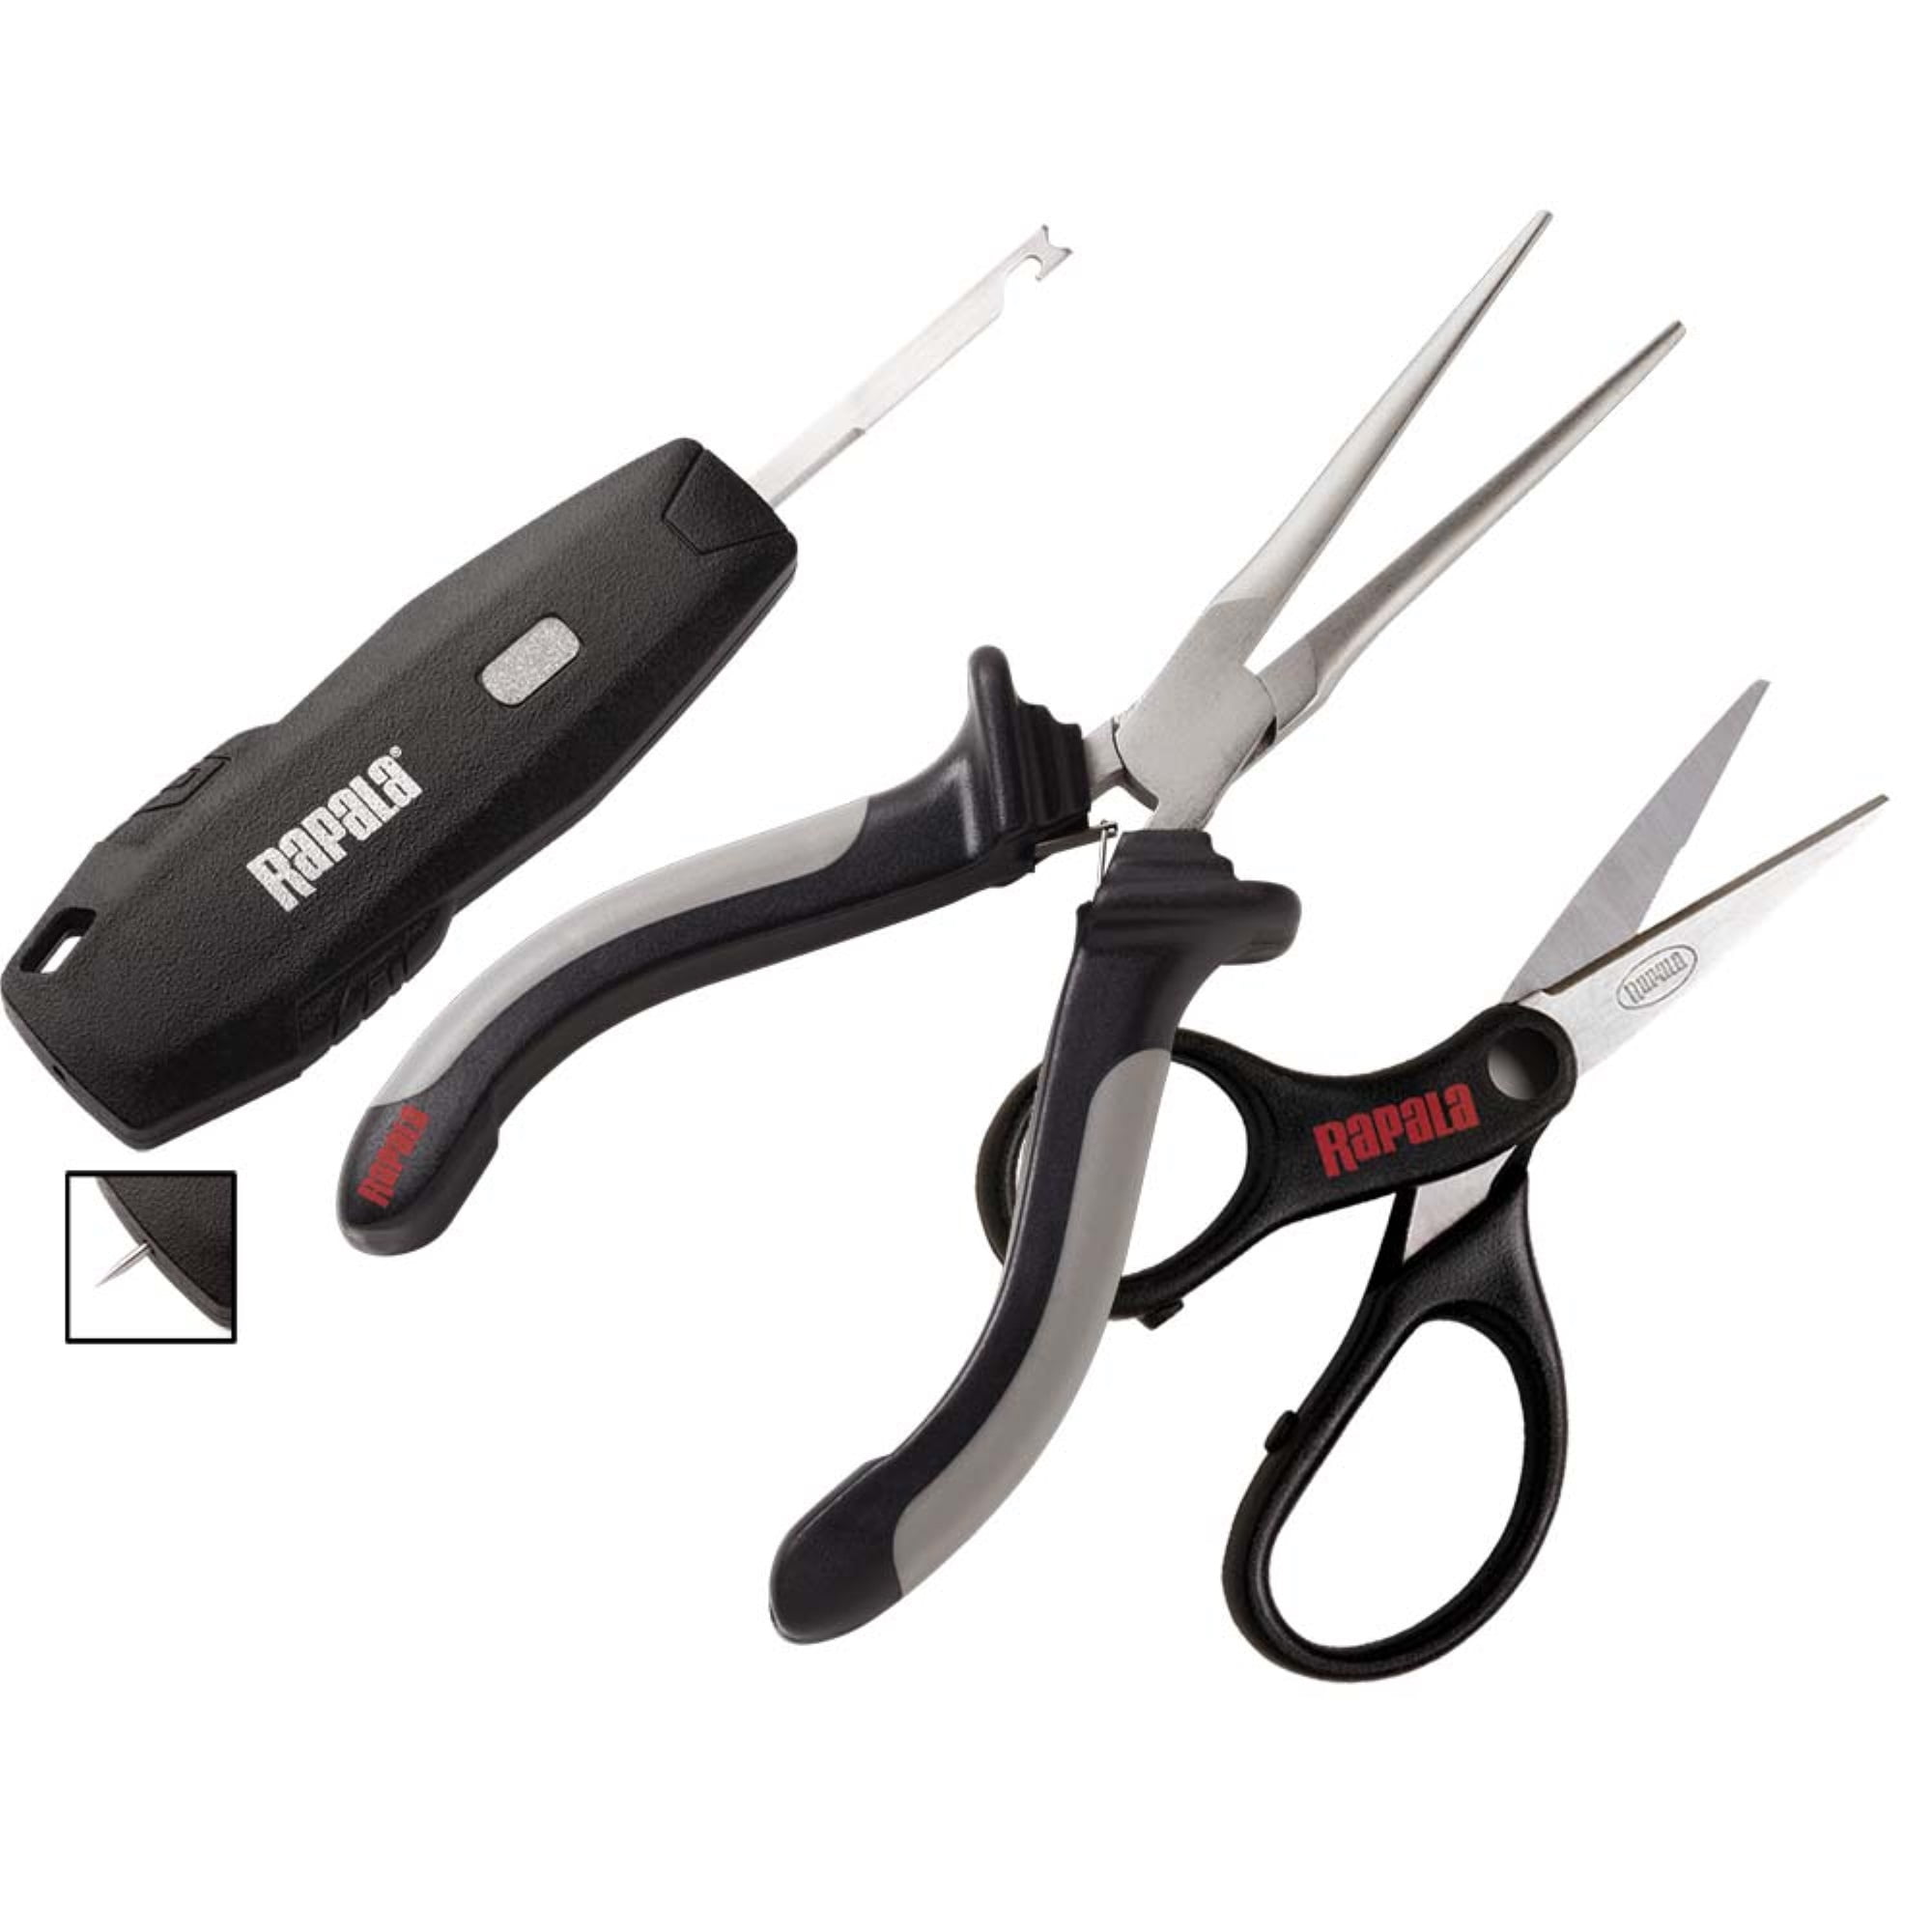 Rapala Panfish Tool Combo with Pliers, Scissors and Hook Remover 